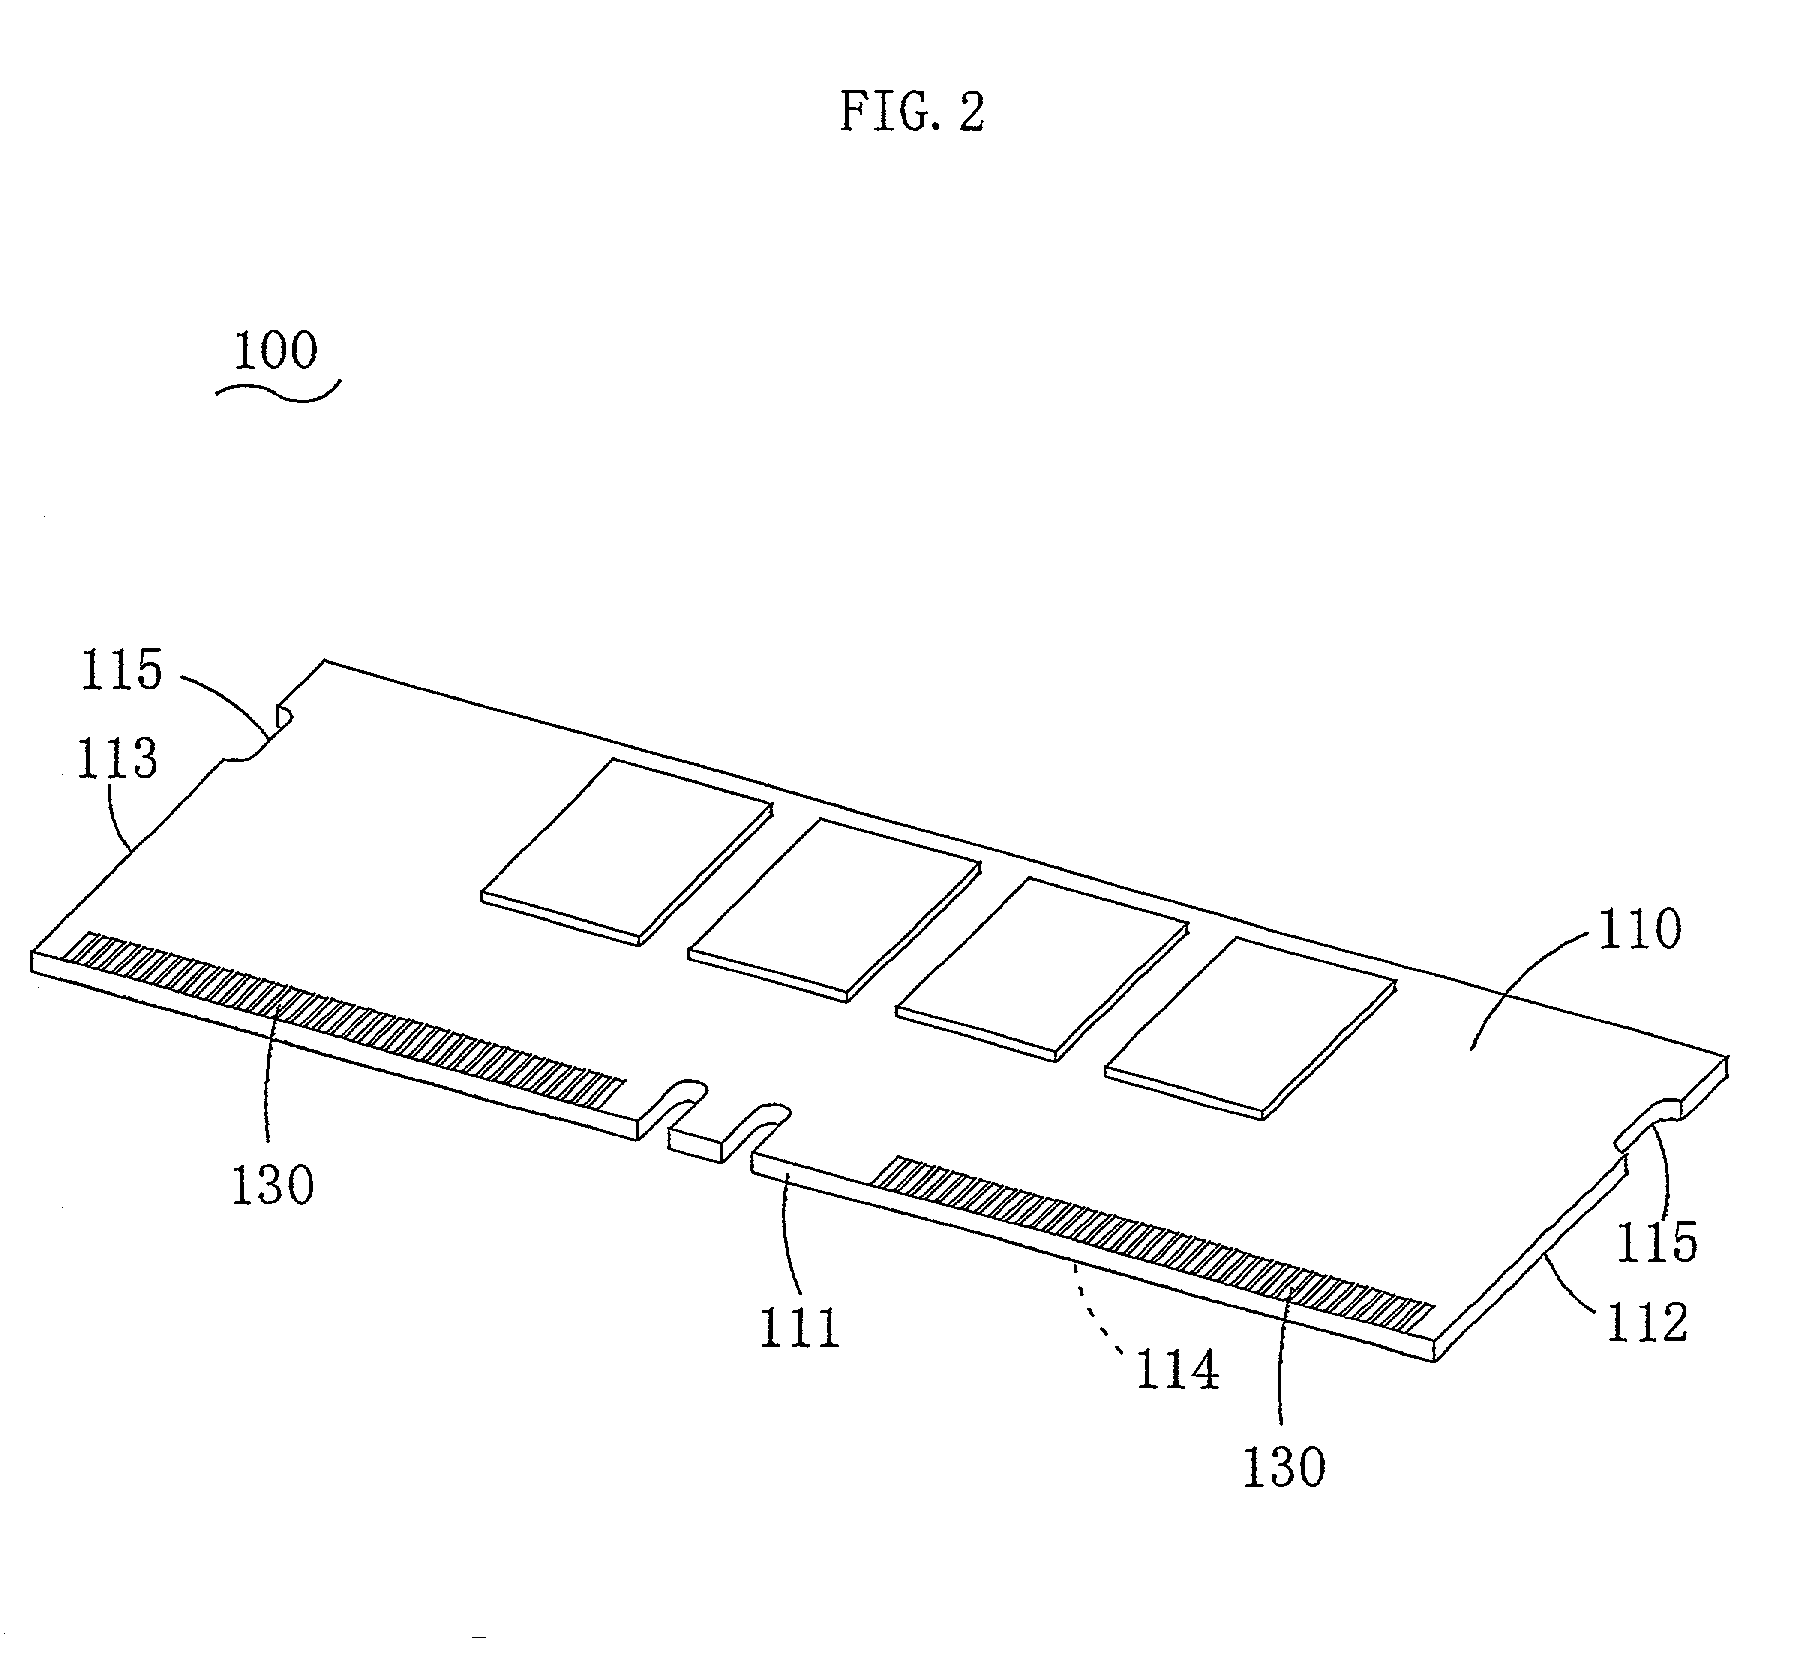 Cap and low insertion force connector for printed circuit board